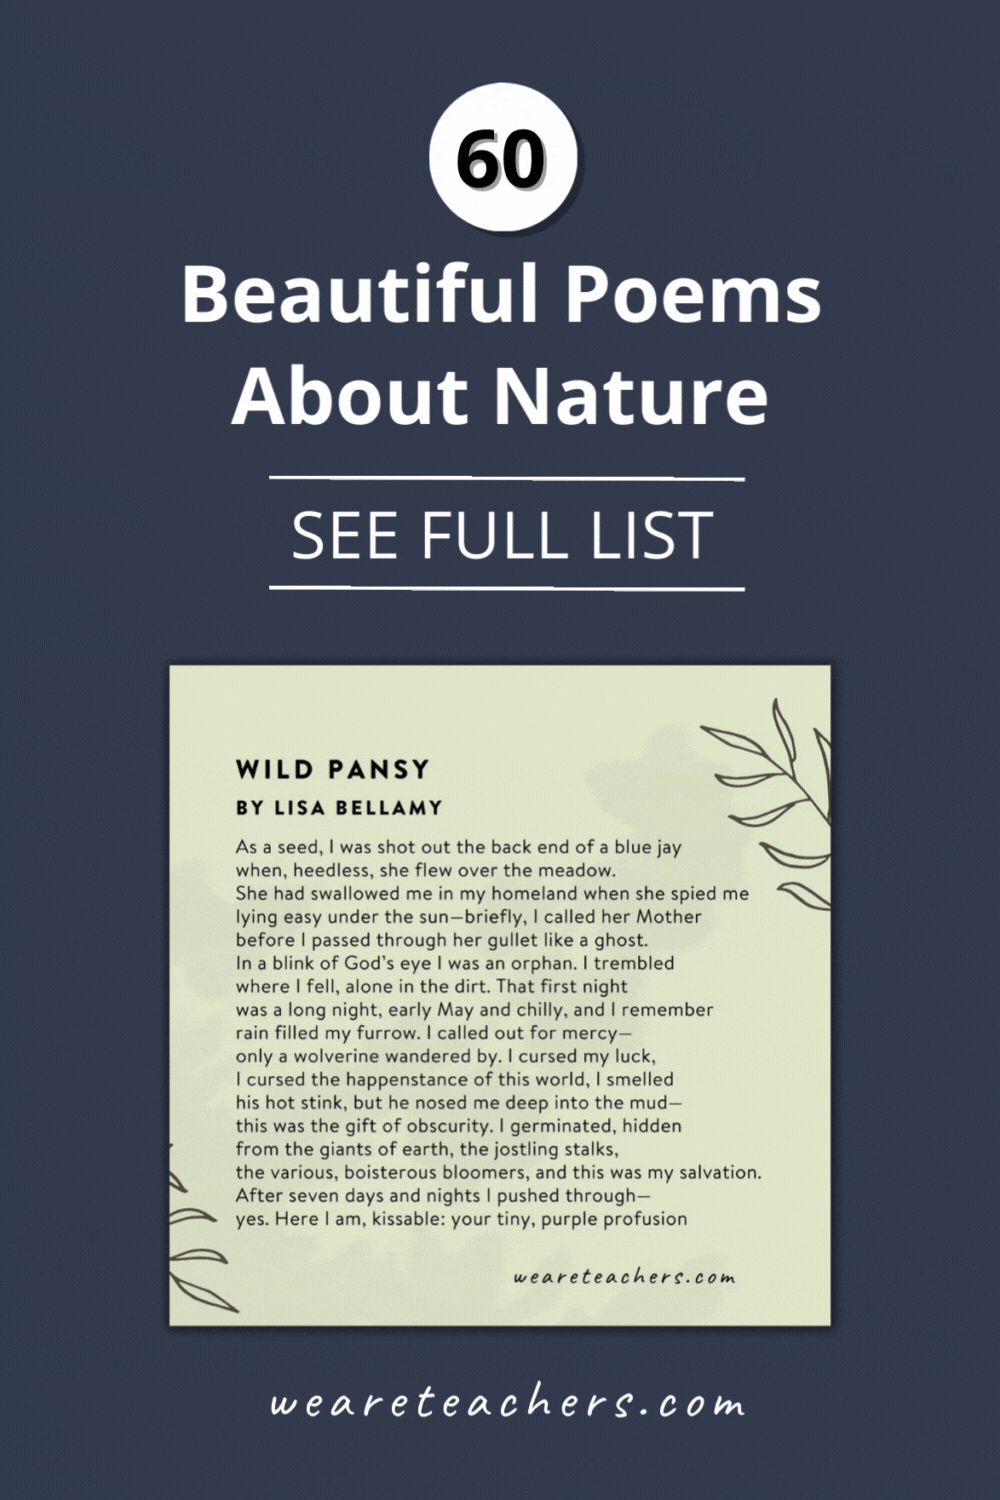 These beautiful poems about nature will inspire your students and are perfect for sharing in the classroom all year round.